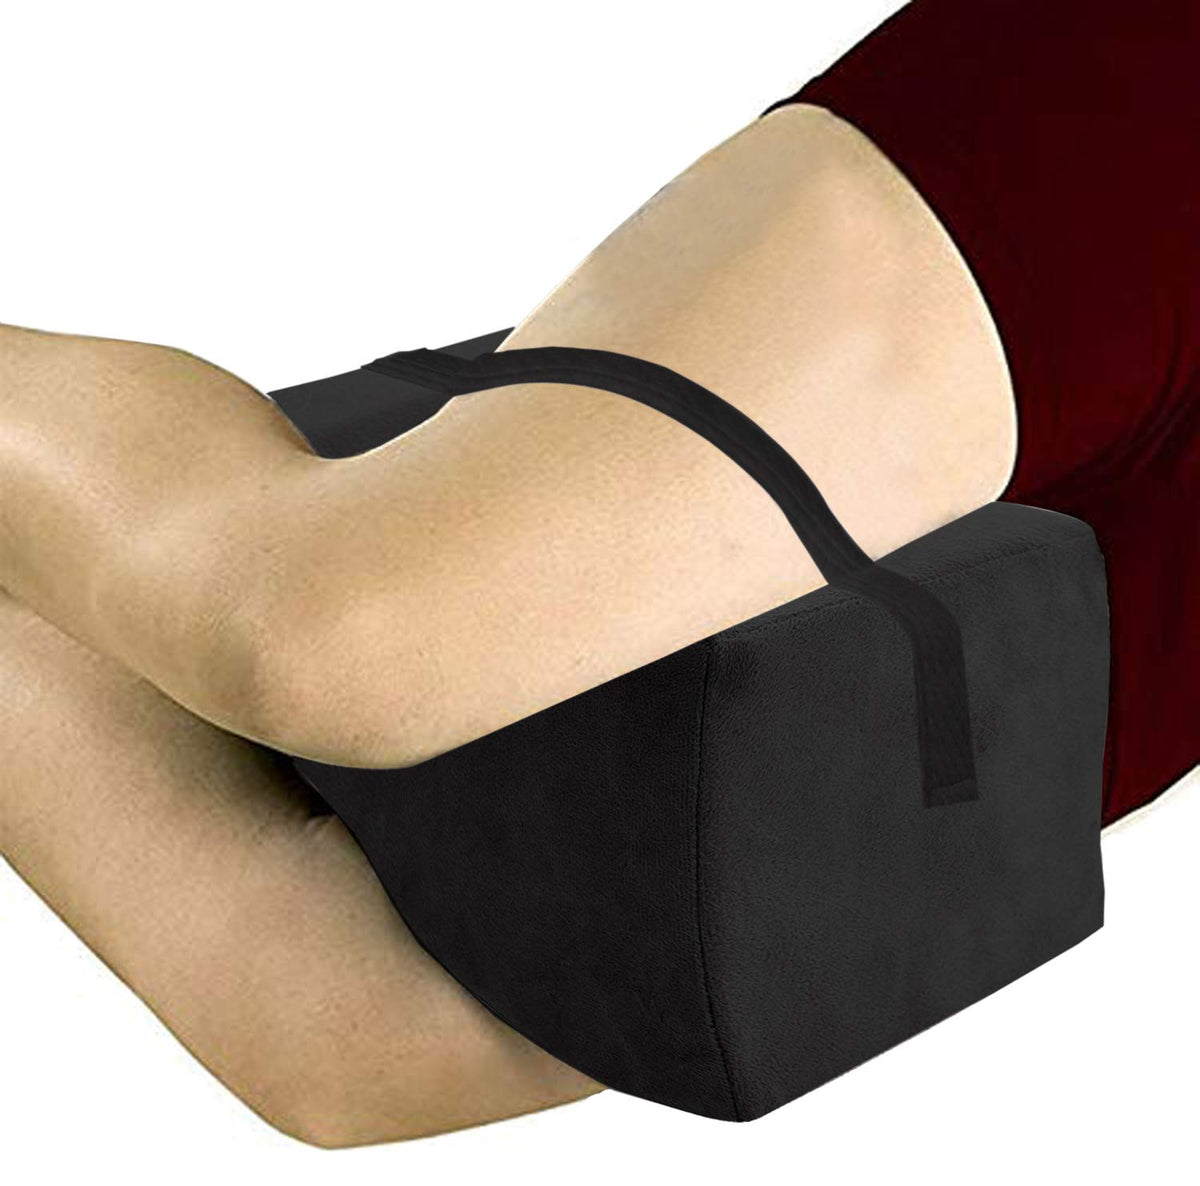 Kuber Industries Memory Foam Orthopaedic Knee Support Leg Rest Pillow for Side Sleepers, for Relief from Sciatica, Back Pain, Leg Pain, Pregnancy, Post Surgery, Hip & Joint Pain (Black) - CTKTC45943